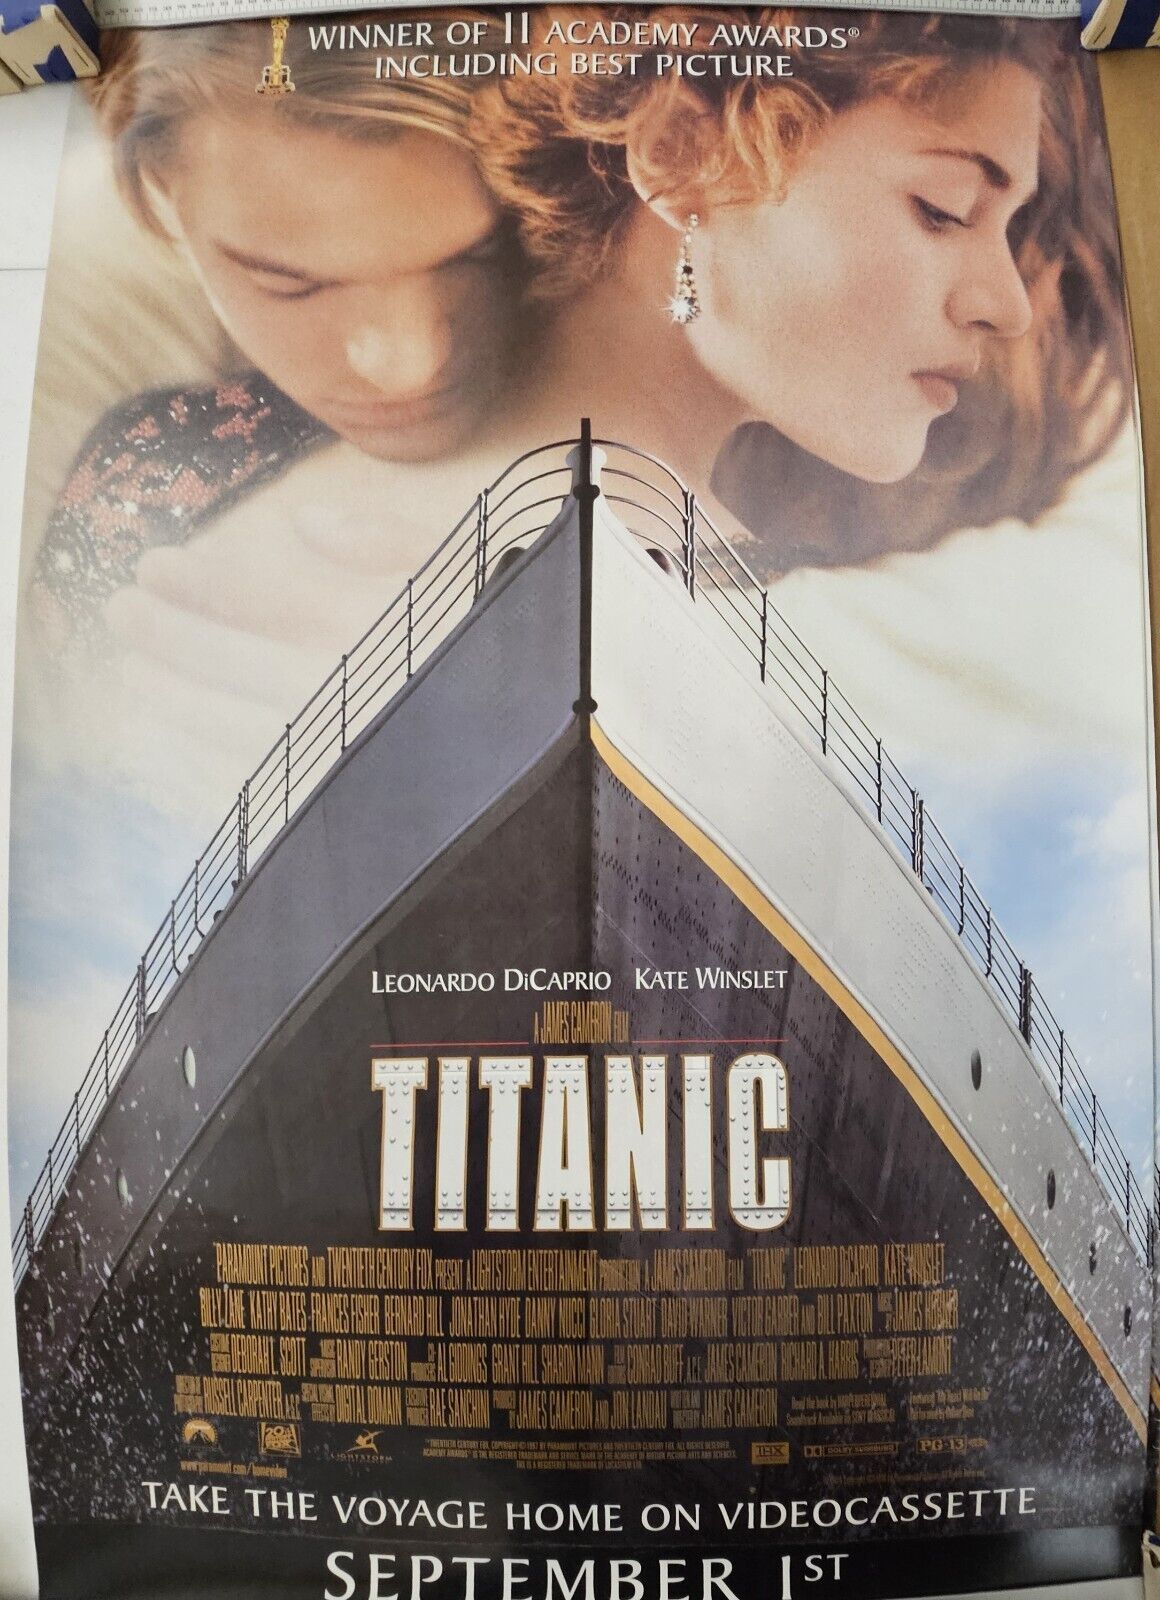 The Epic TITANIC   27 x 40  DVD promotional Movie poster